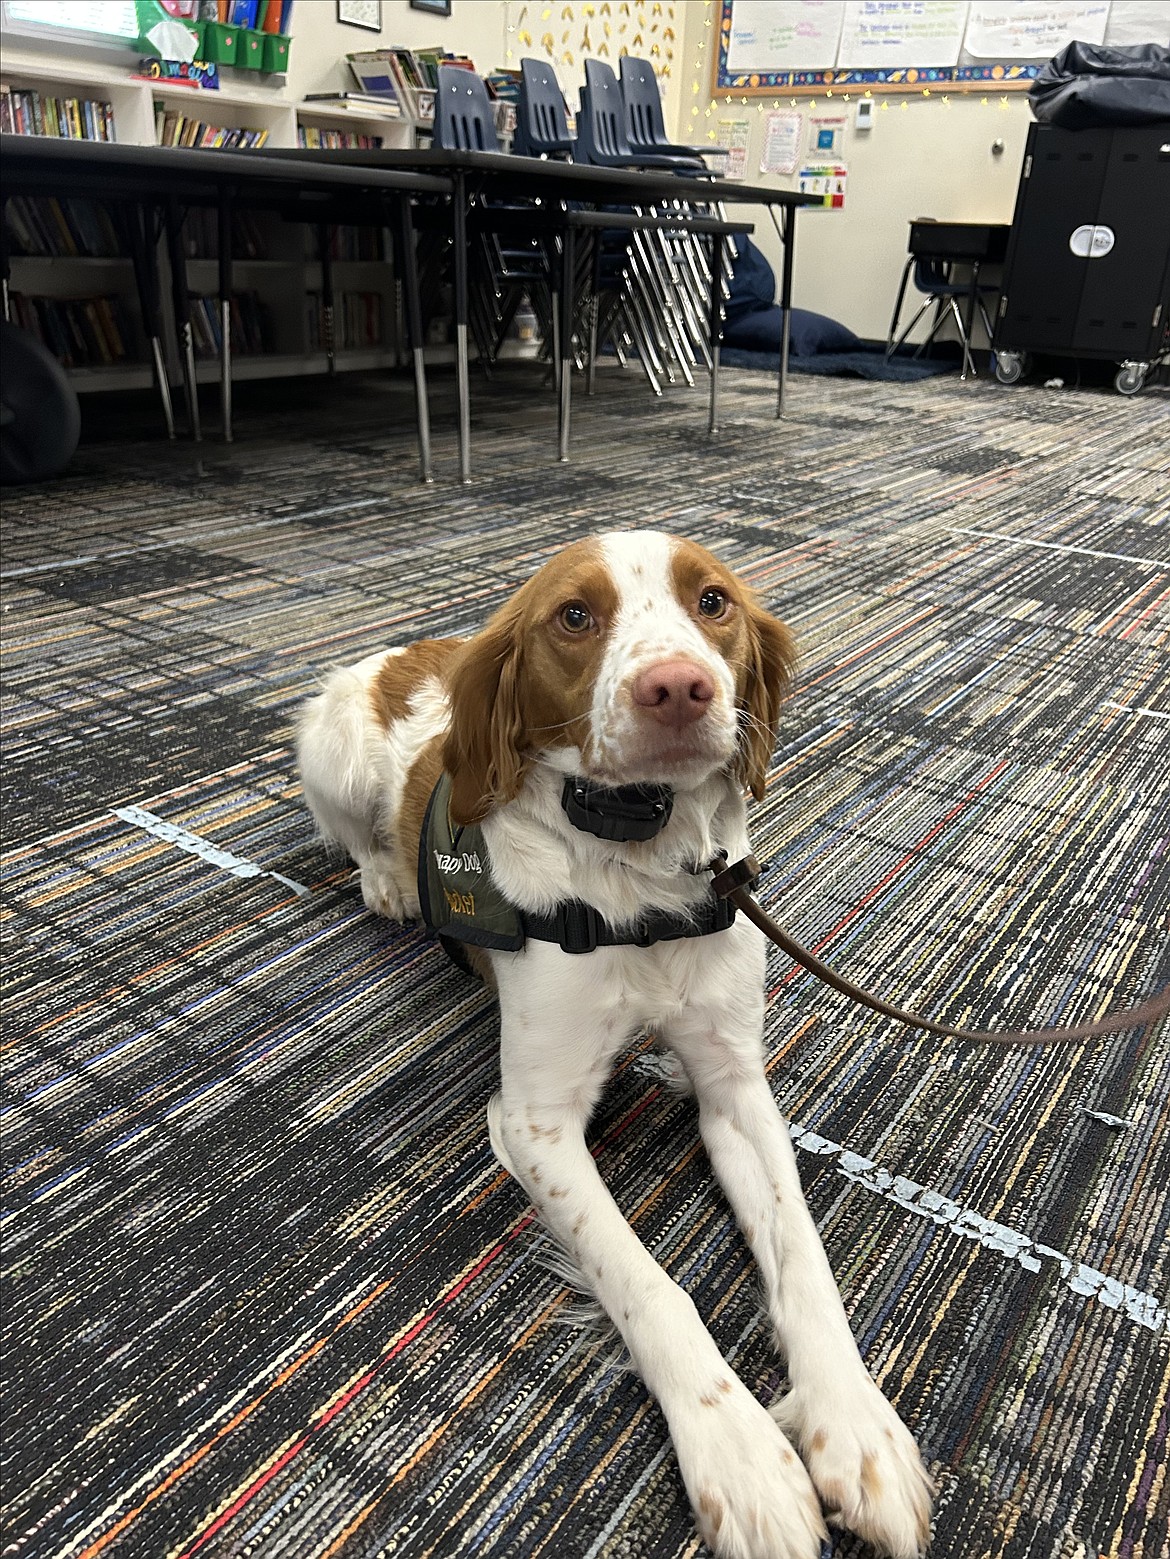 Kootenai County Sheriff's Office therapy dog Rocket was one of four support canines written about by NExA students in a series of essays.